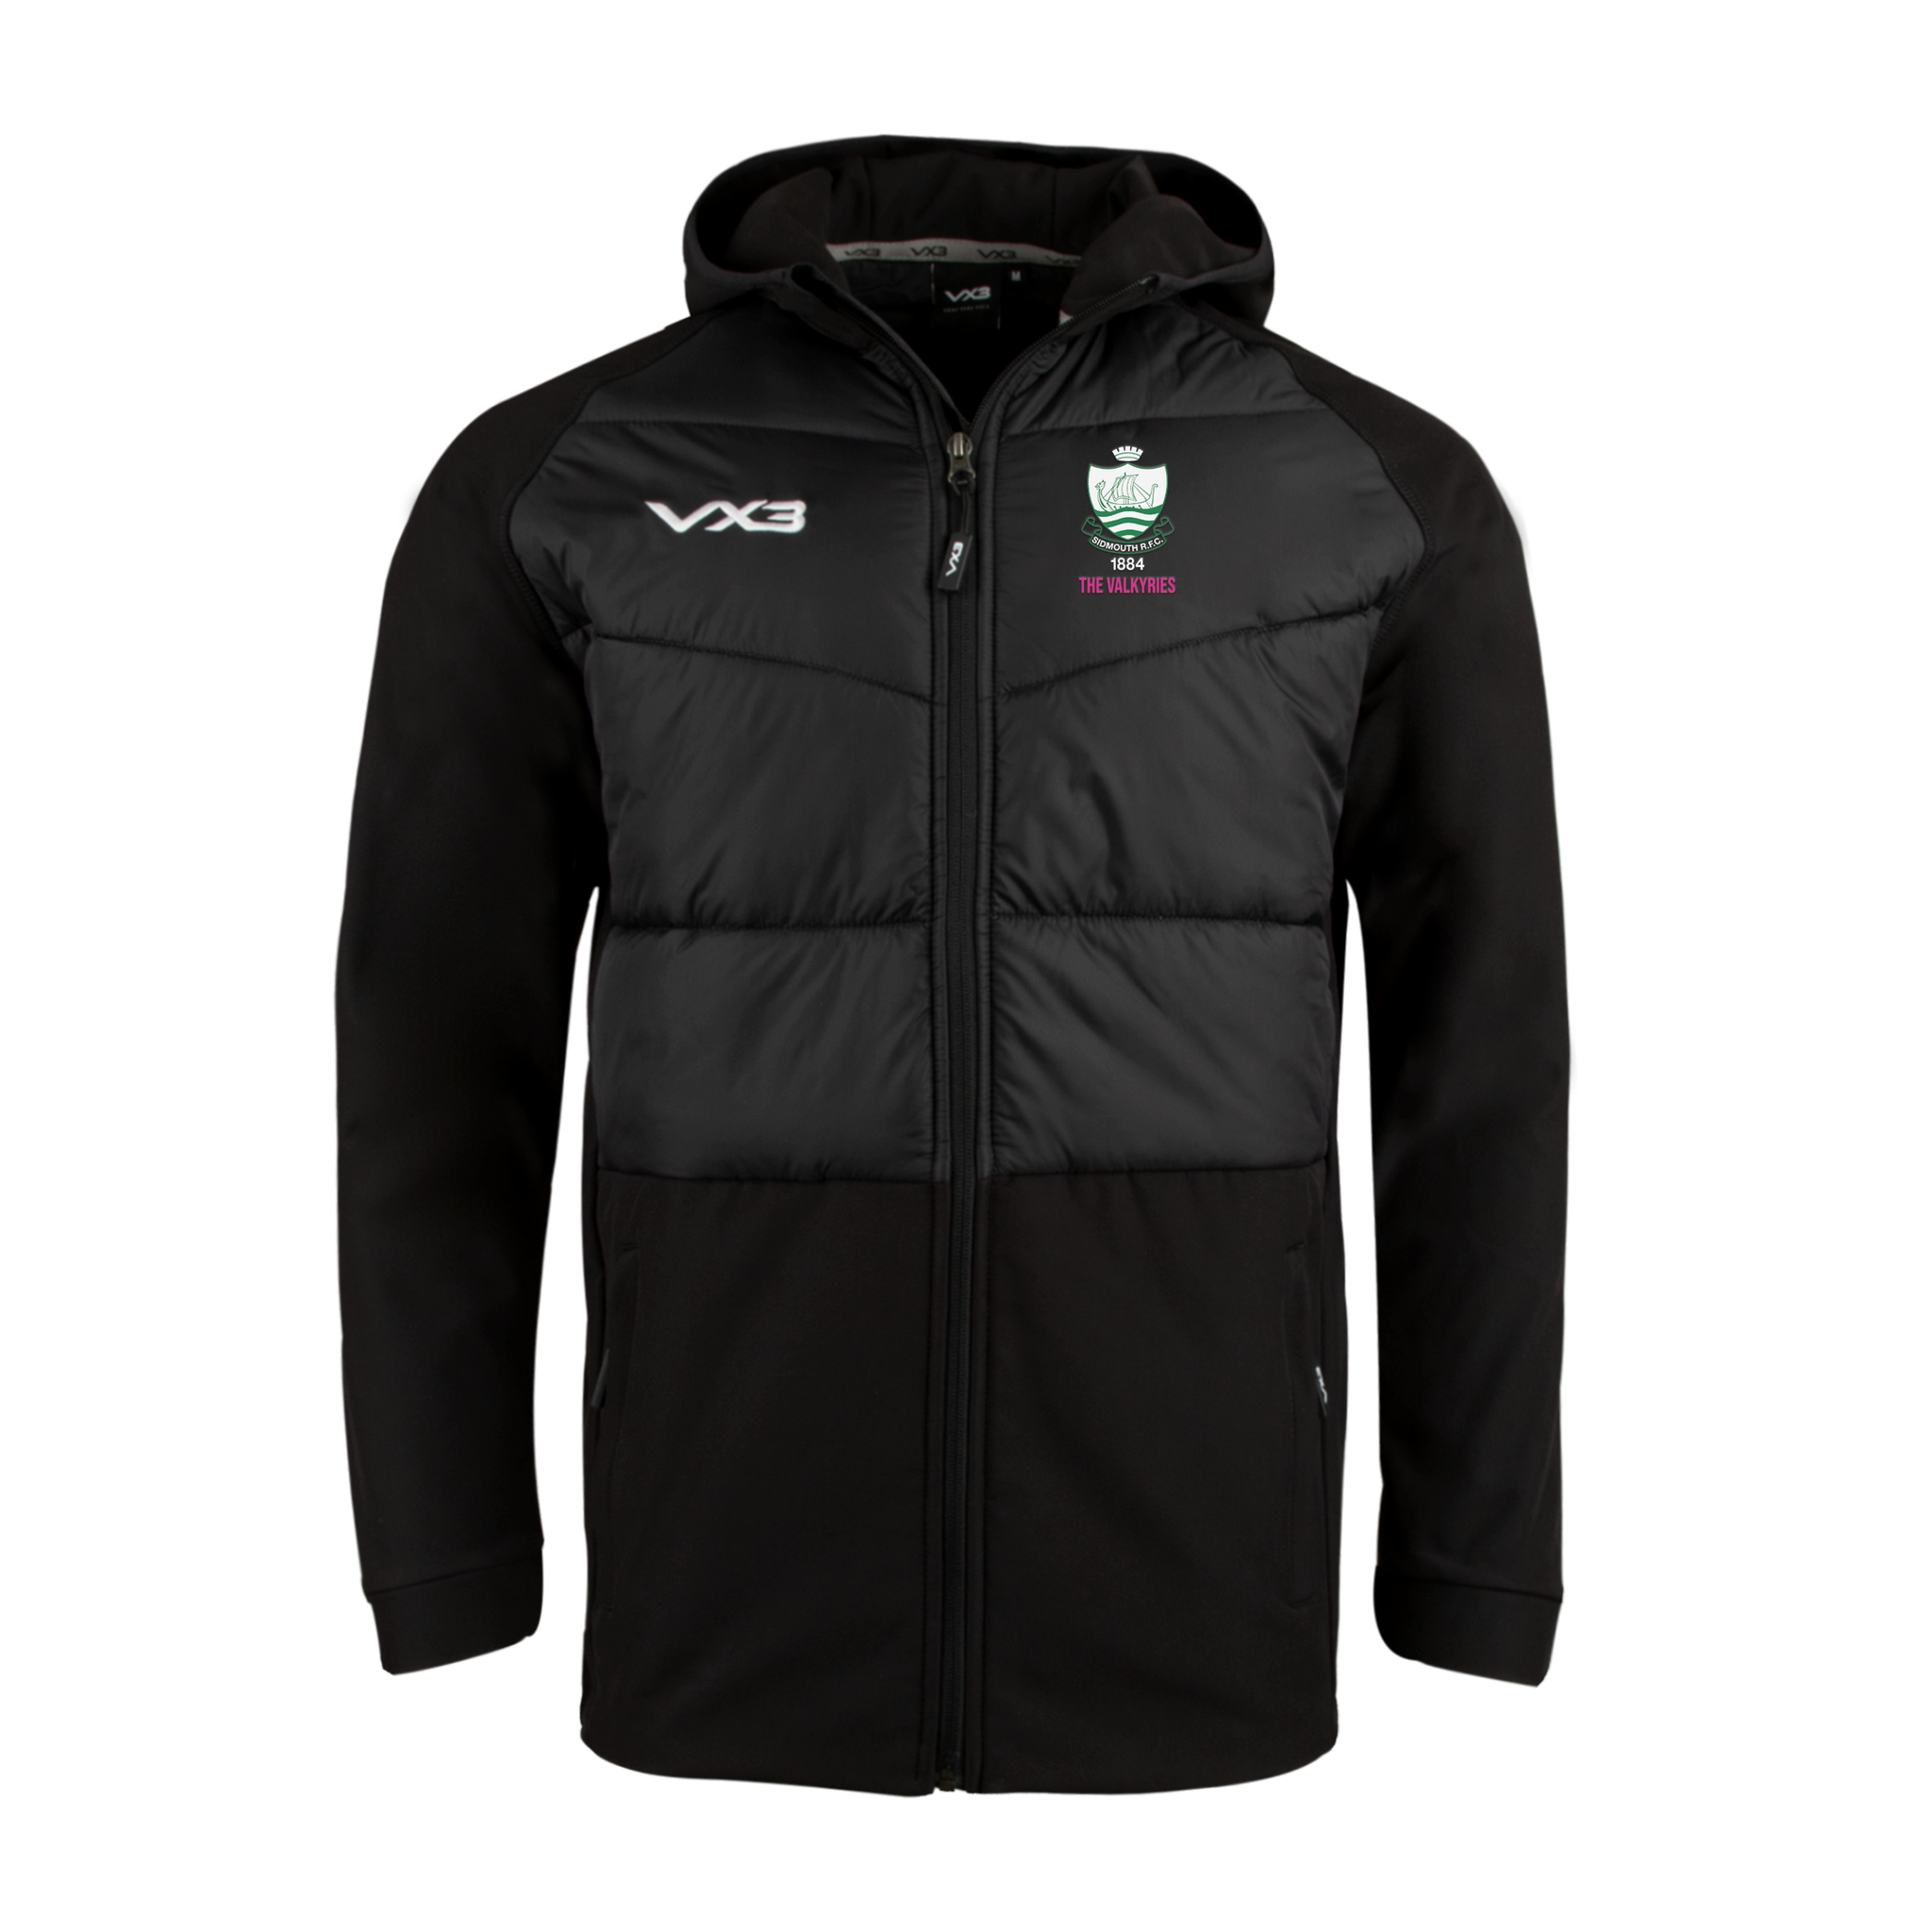 Sidmouth RFC Womens (The Valkyries) Tempest Hybrid Jacket